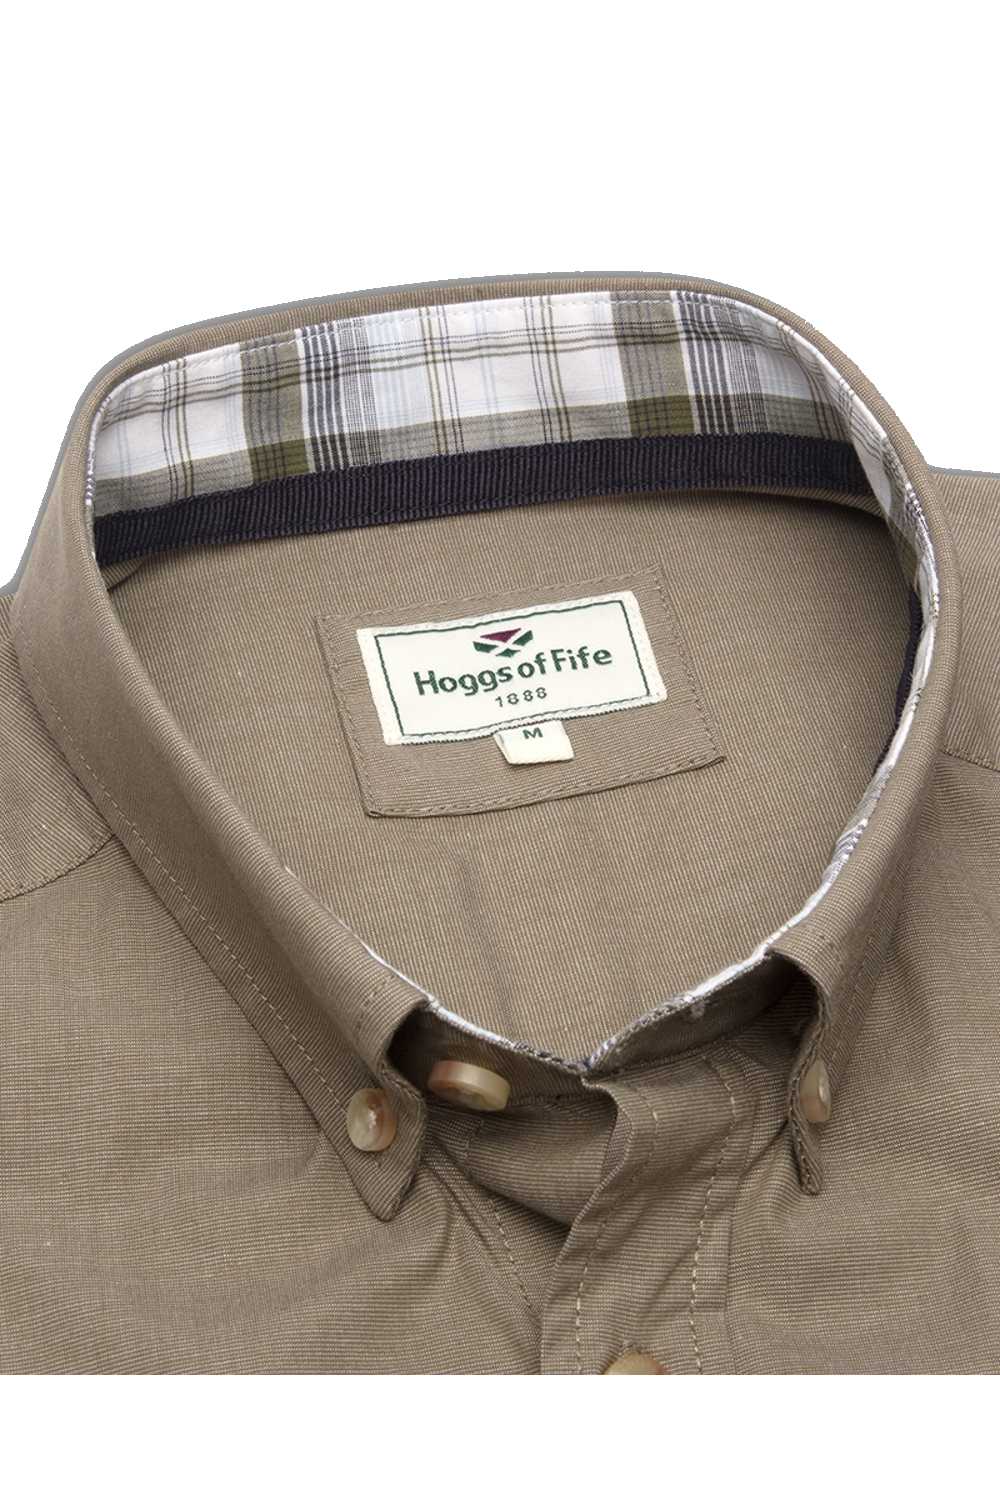 Hoggs of Fife Tolsta Short Sleeve Cotton Stretch Plain Shirt in Olive 